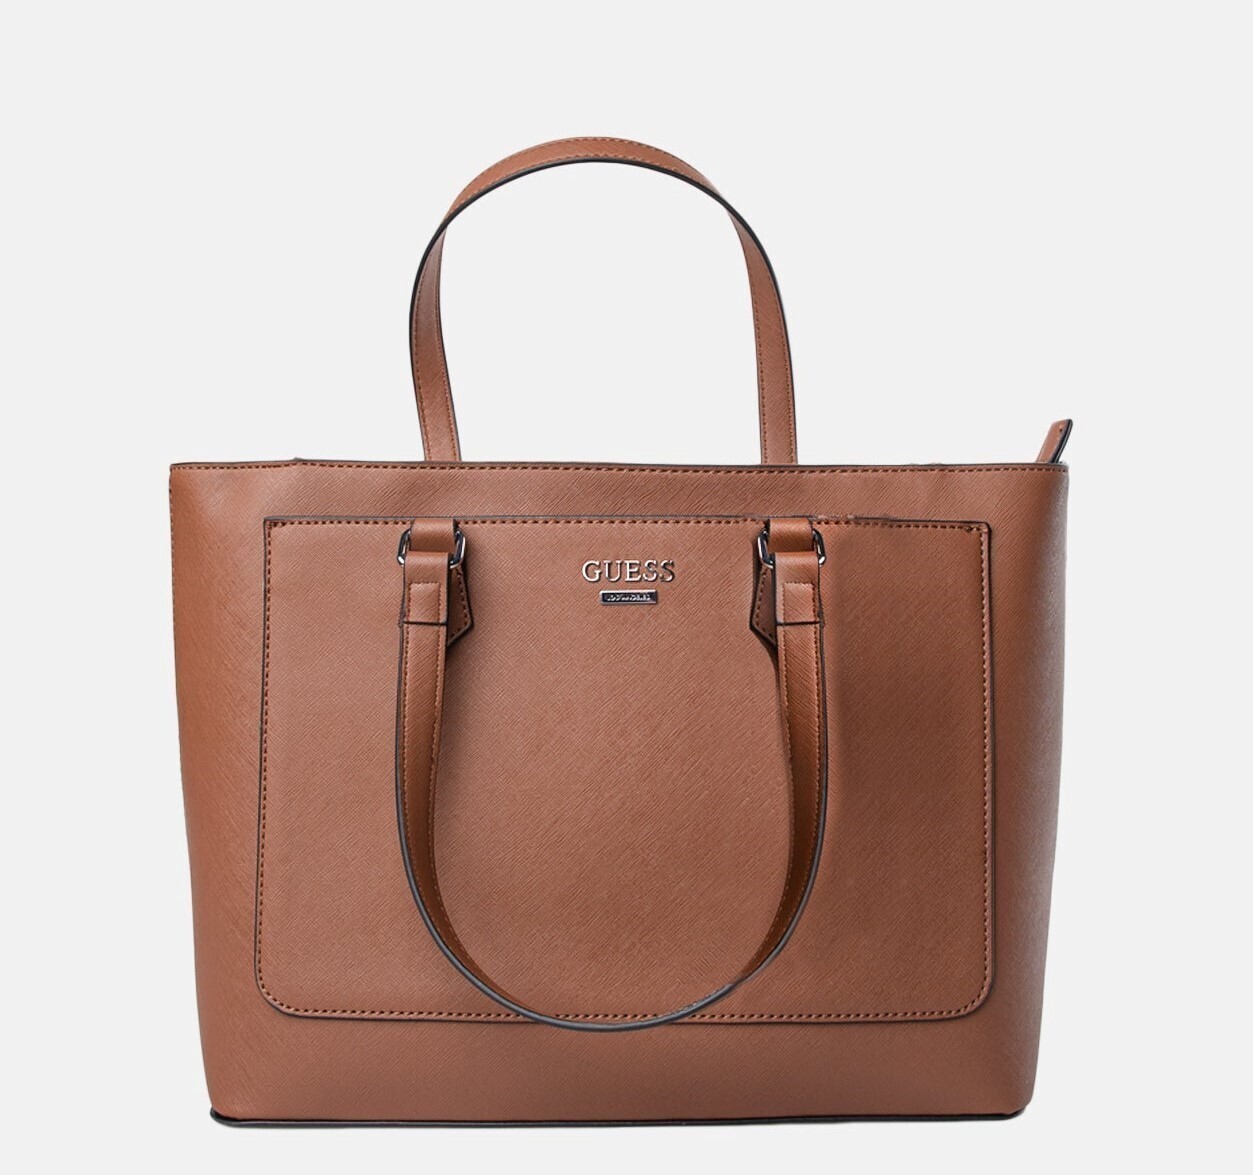 GUESS HOMESTEAD TOTE / COLOR COFFEE